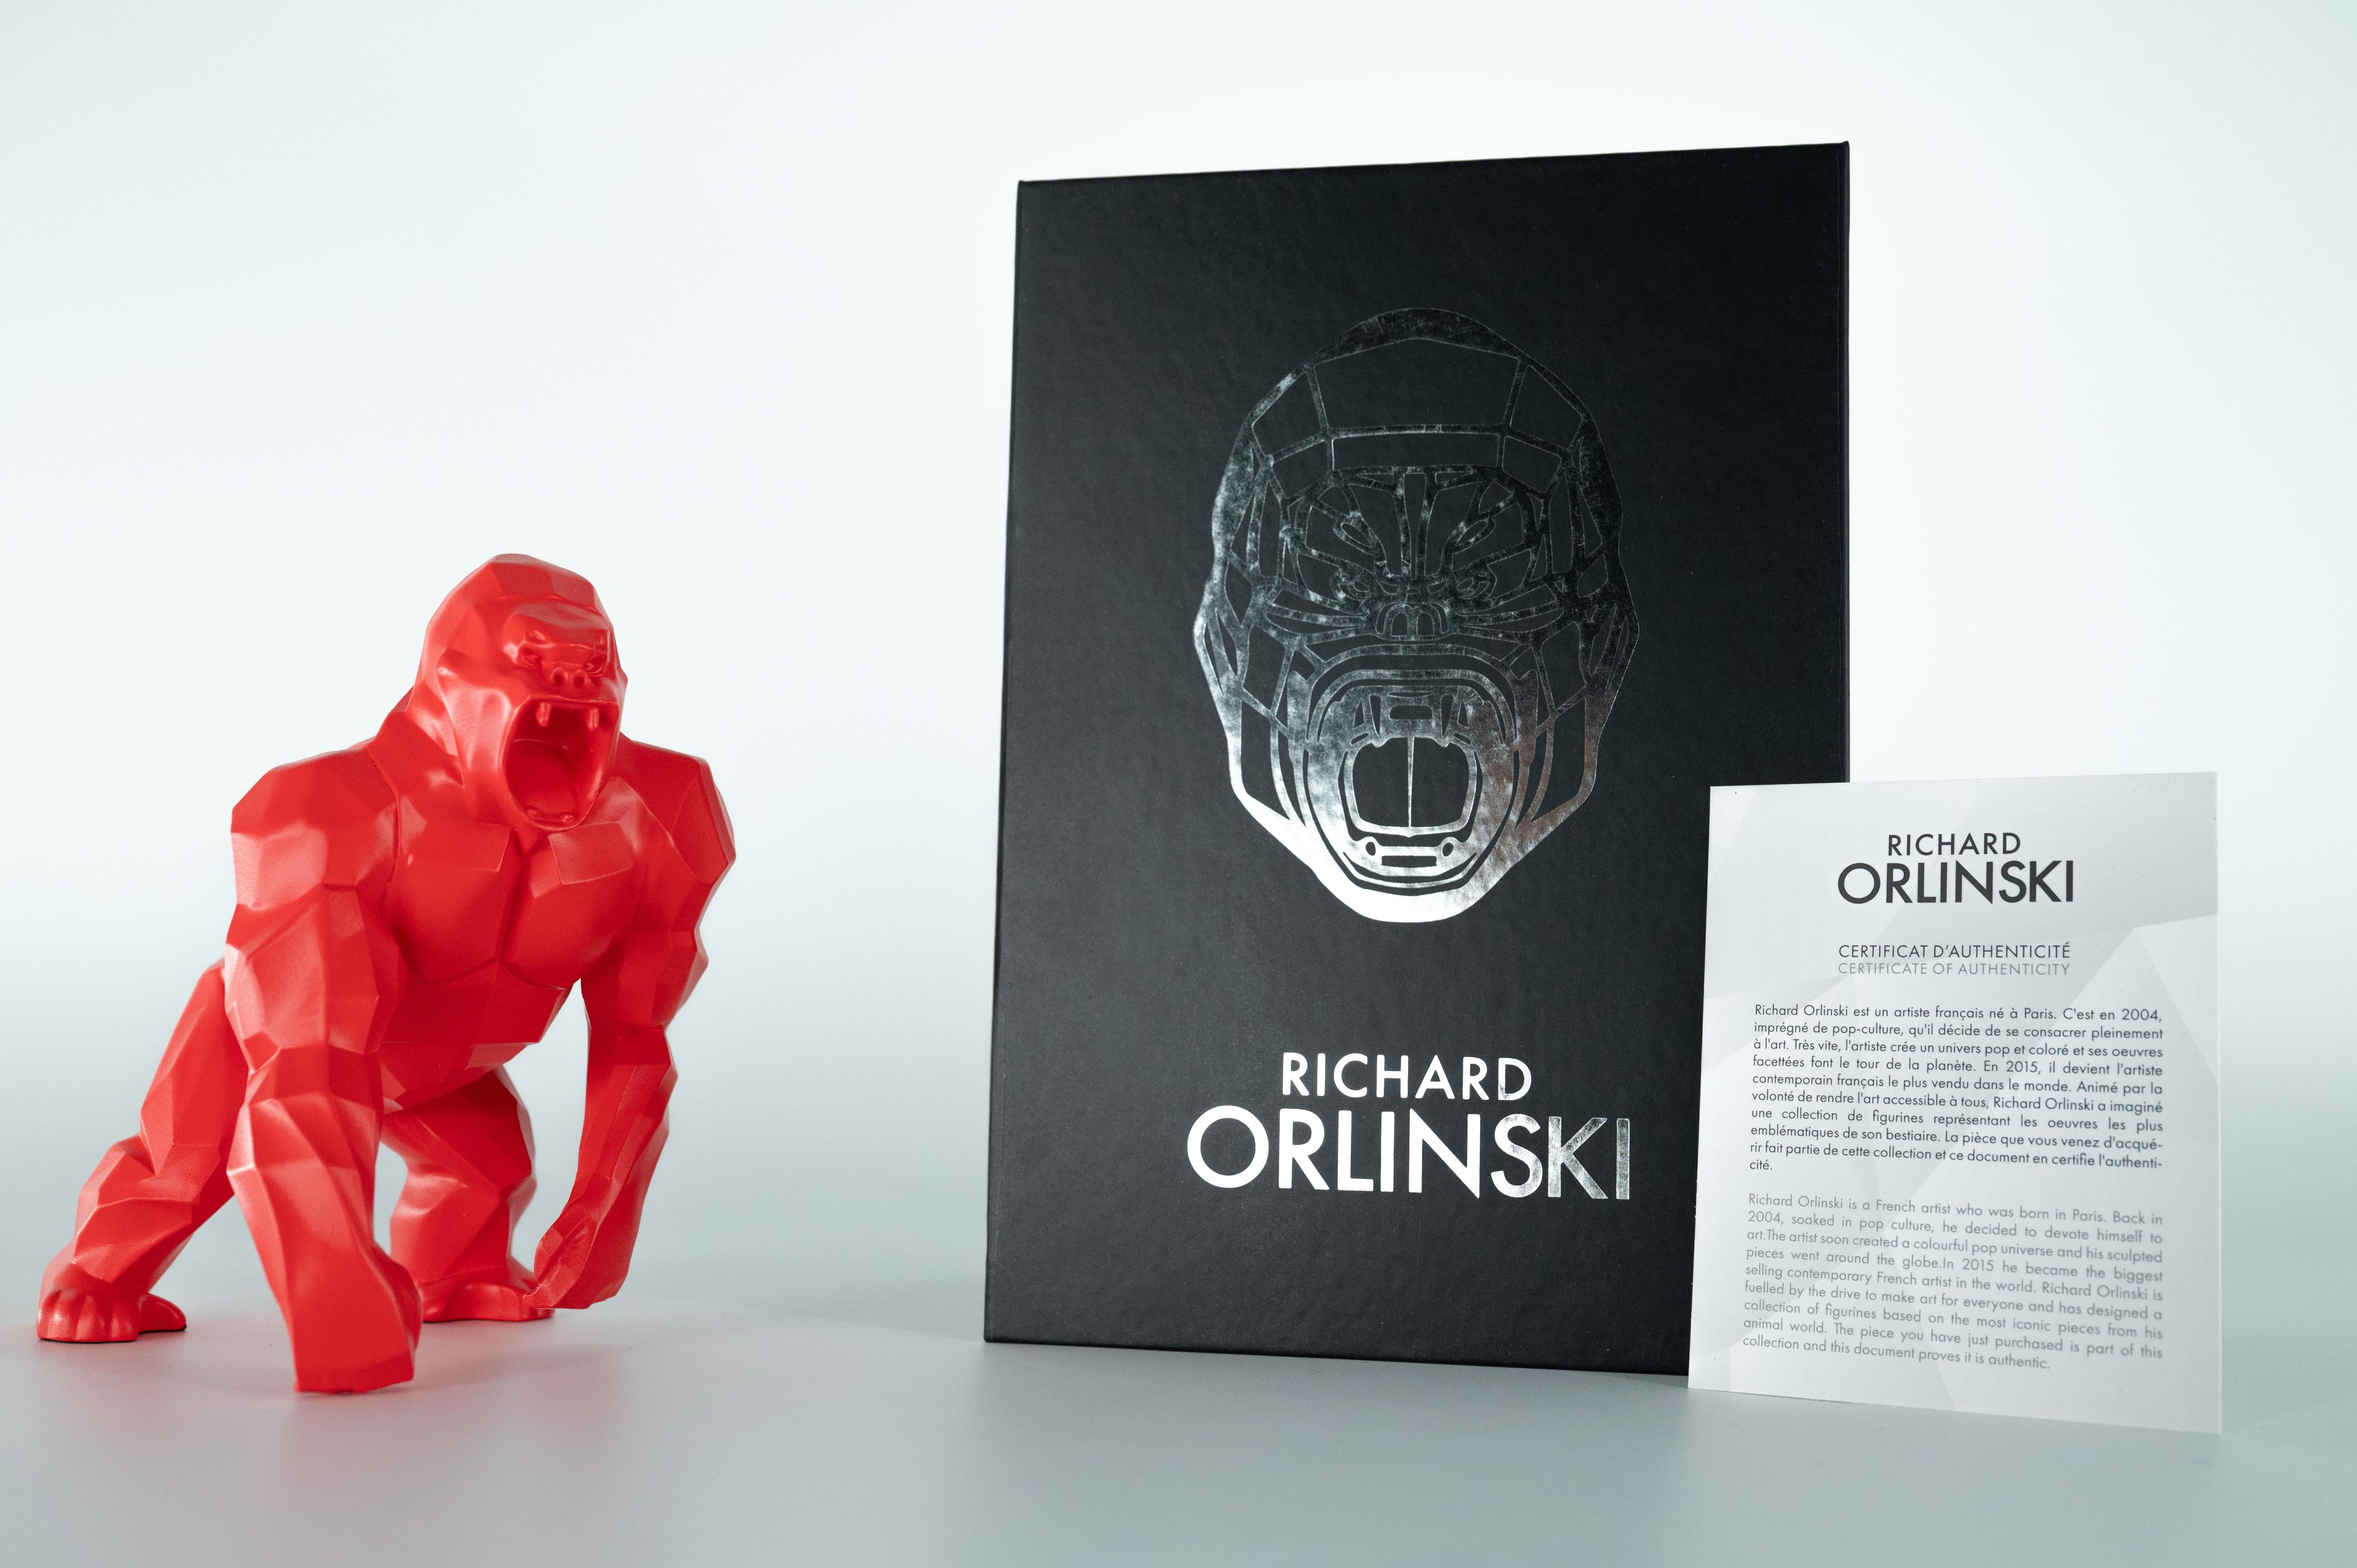 Richard ORLINSKI
Kong Origin (Red Mat Edition)

Sculpture in resin
Matte red
About 21 x 15 x 14 cm (c. 8.2 x 5.9 x 5.5 in)
Presented in original box with certificate

Excellent condition